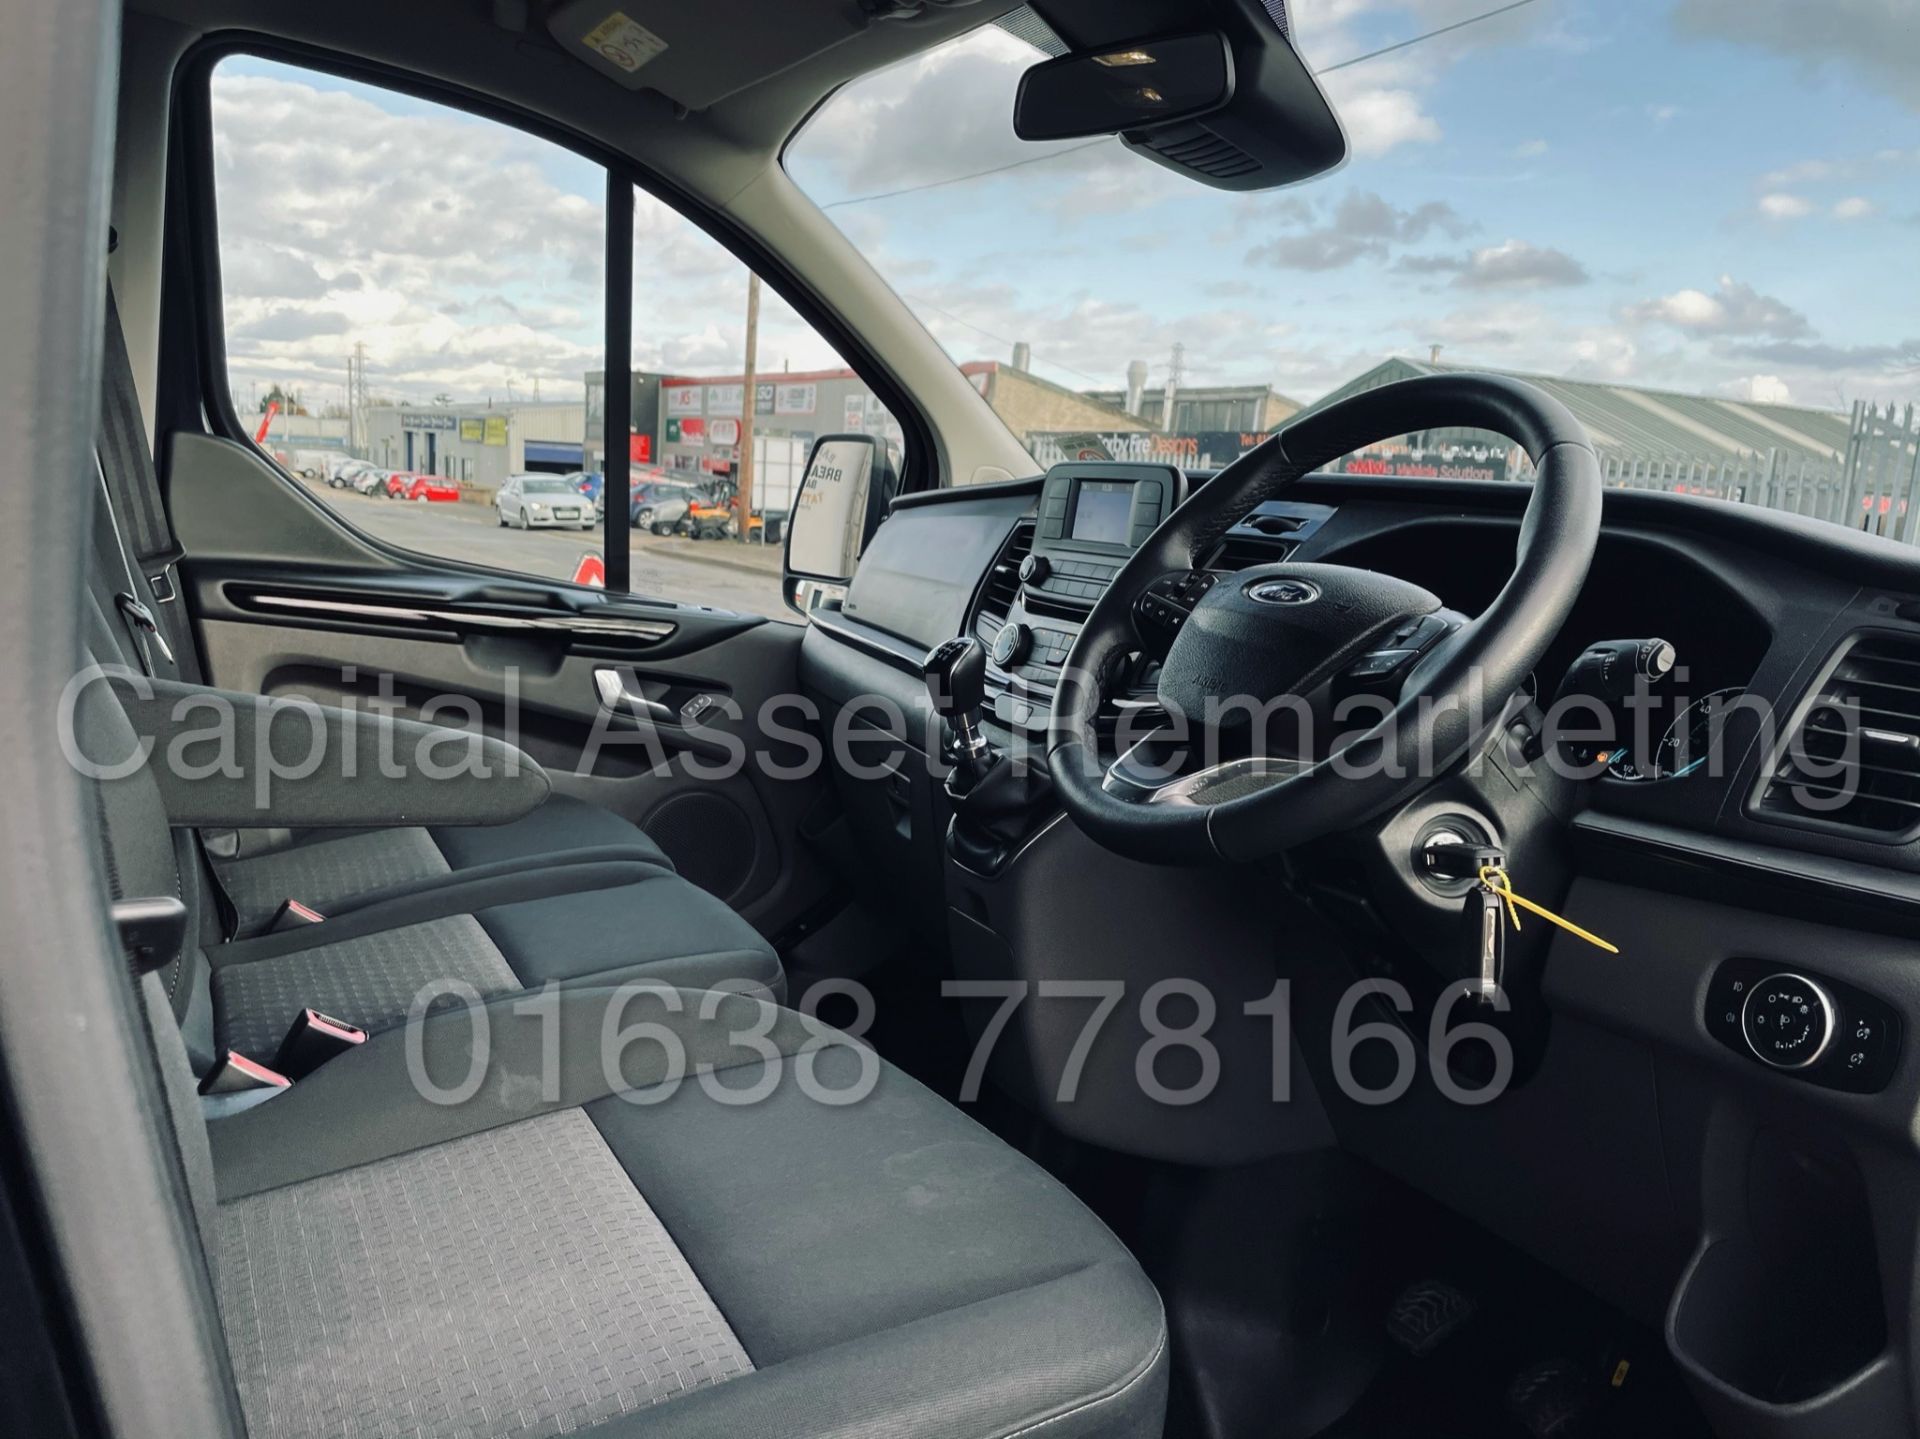 (On Sale) FORD TRANSIT CUSTOM TOURNEO *9 SEATER MPV / BUS* (2019) '2.0 TDCI - 130 BHP' (1 OWNER) - Image 33 of 46